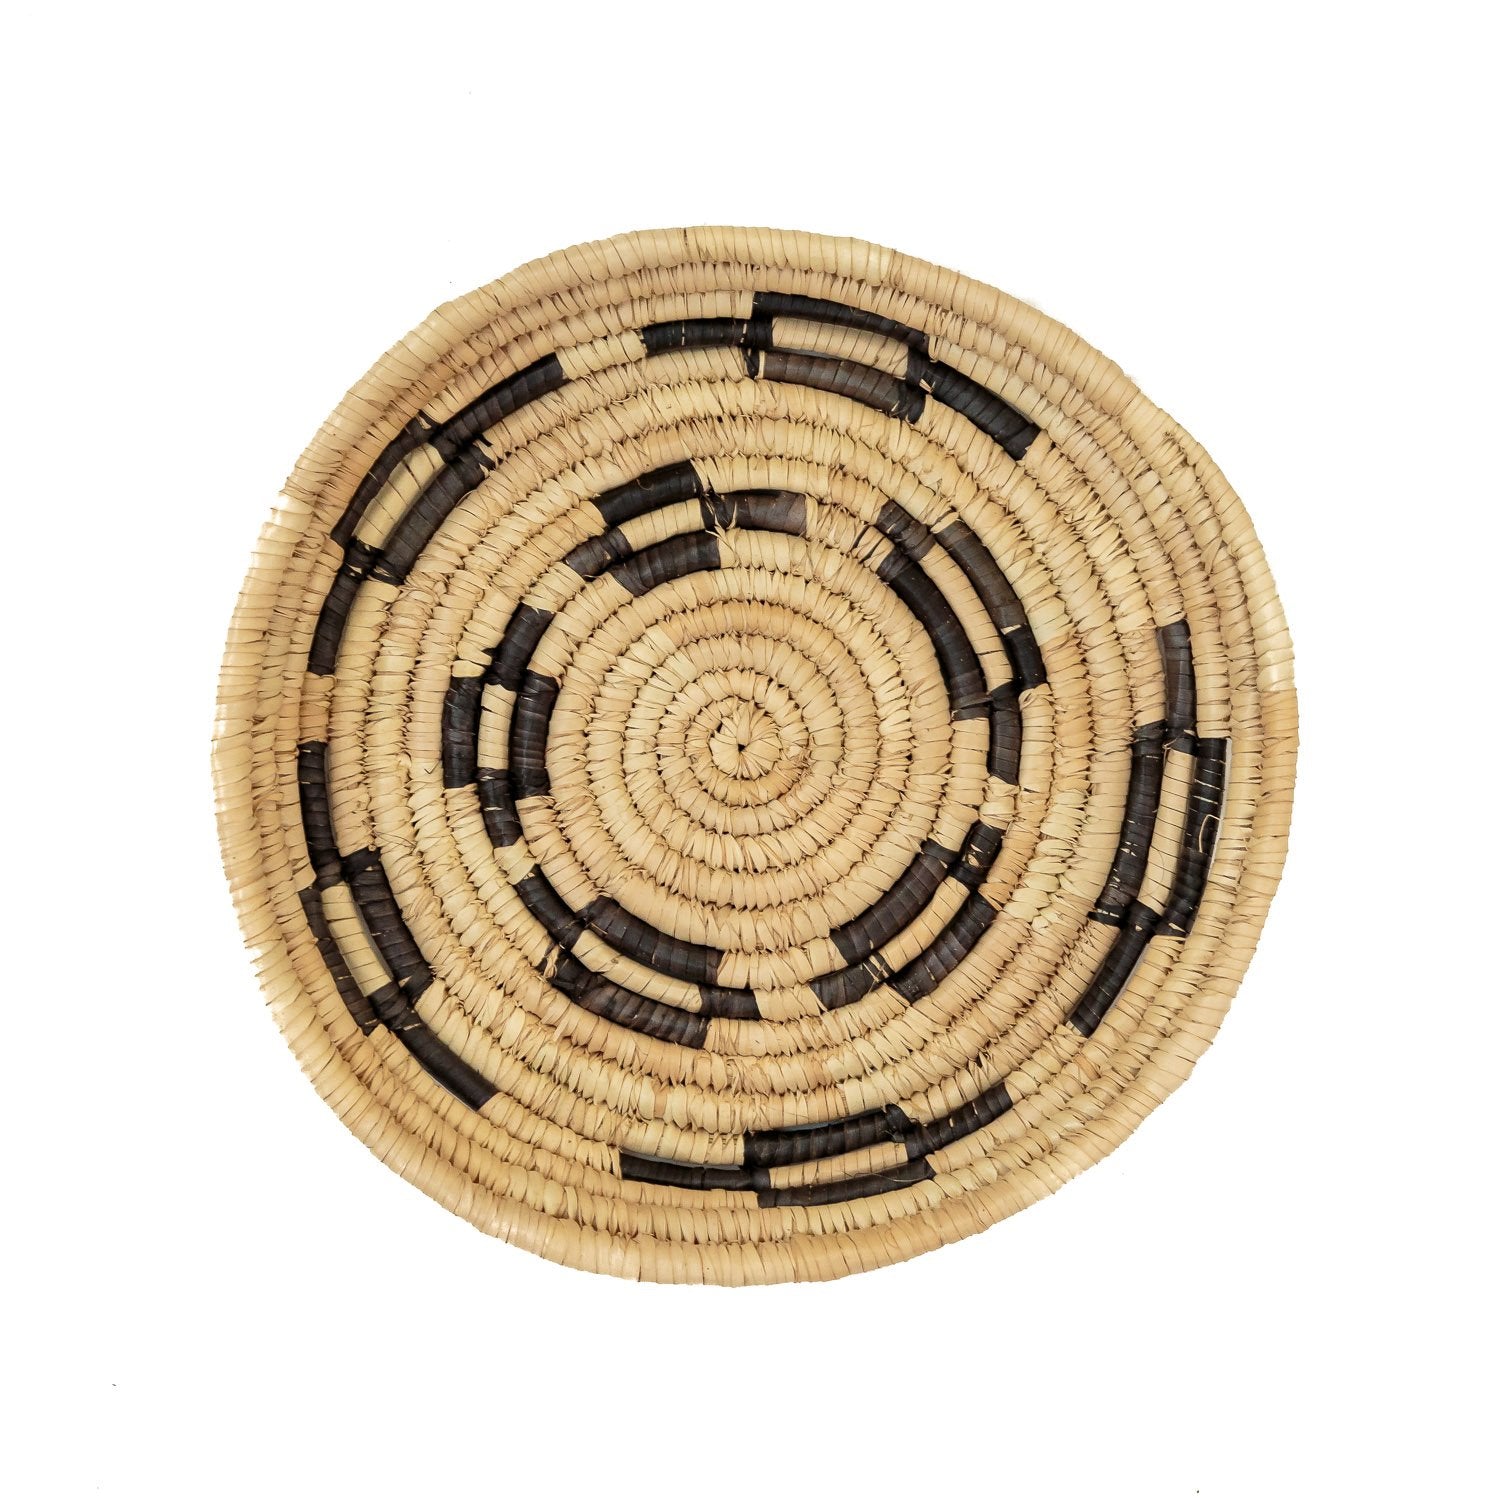 Woven Platter with Patterns - Weaving by TRIBAL TEXTILES - Handcrafted Home Decor Interiors - African Made